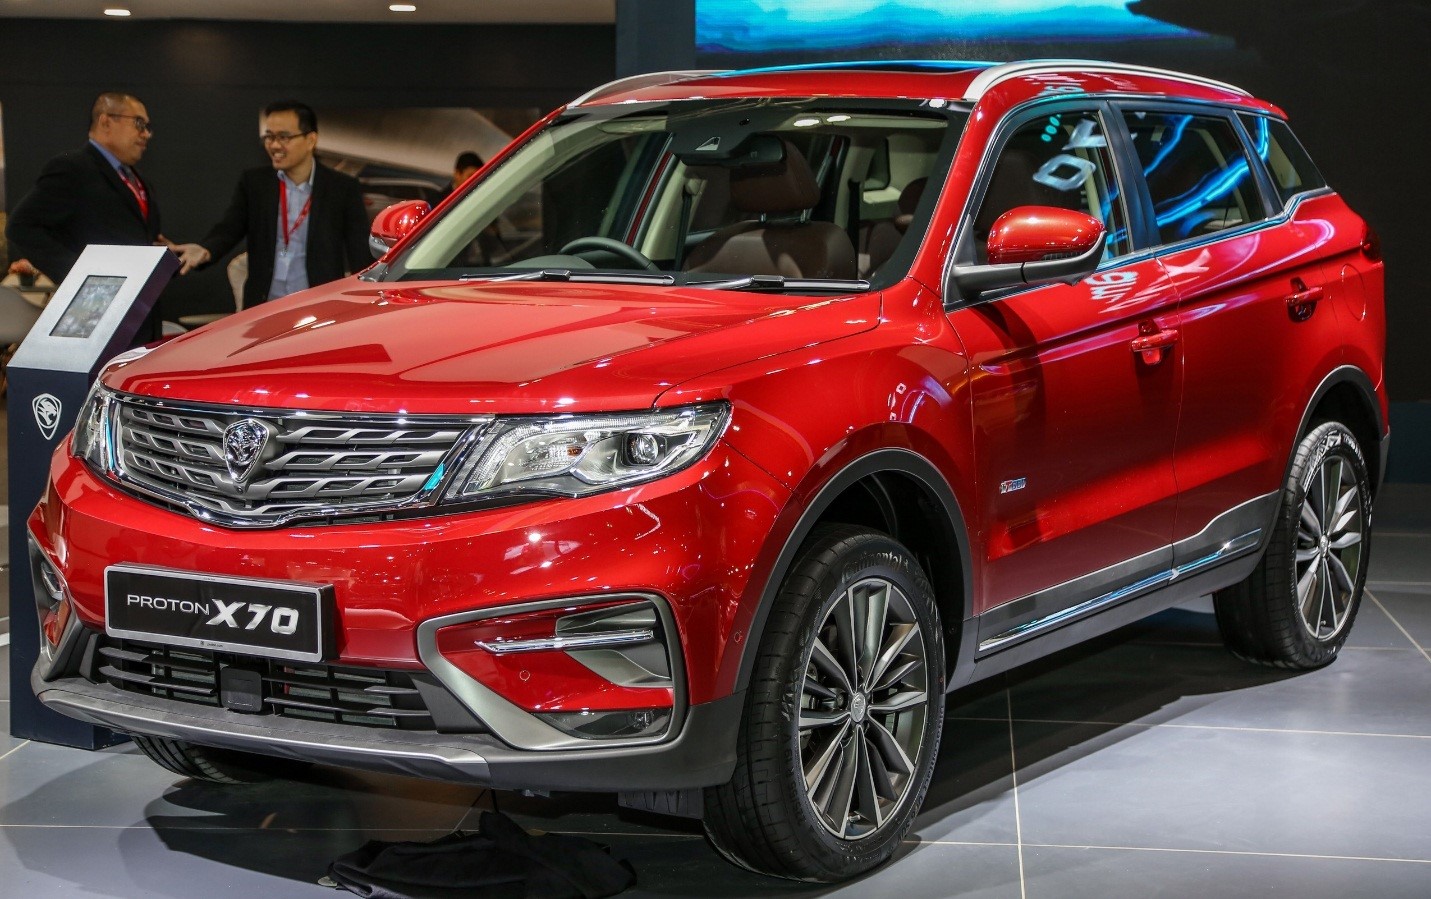 Proton SUV X70 will launched in Pakistan in two form ‘AWD’ and ‘FWD